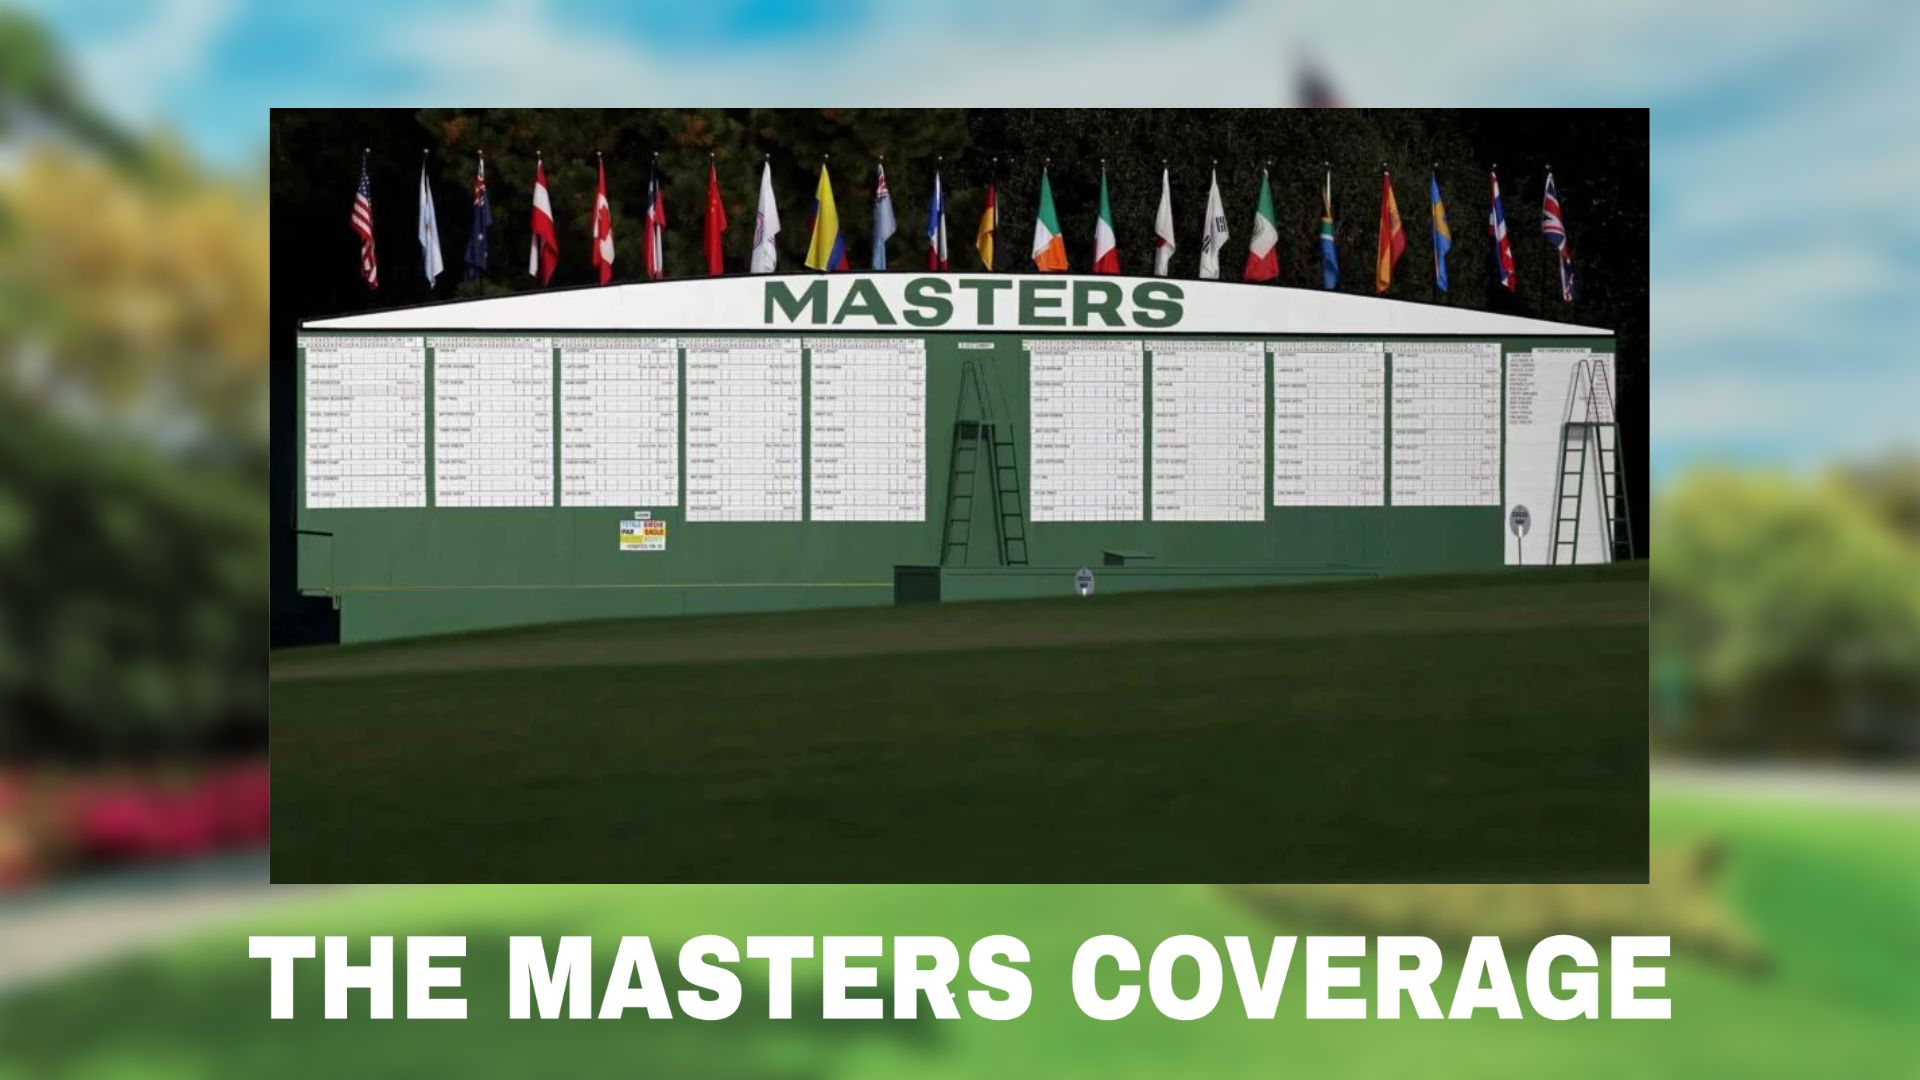 History of The Masters Tournament